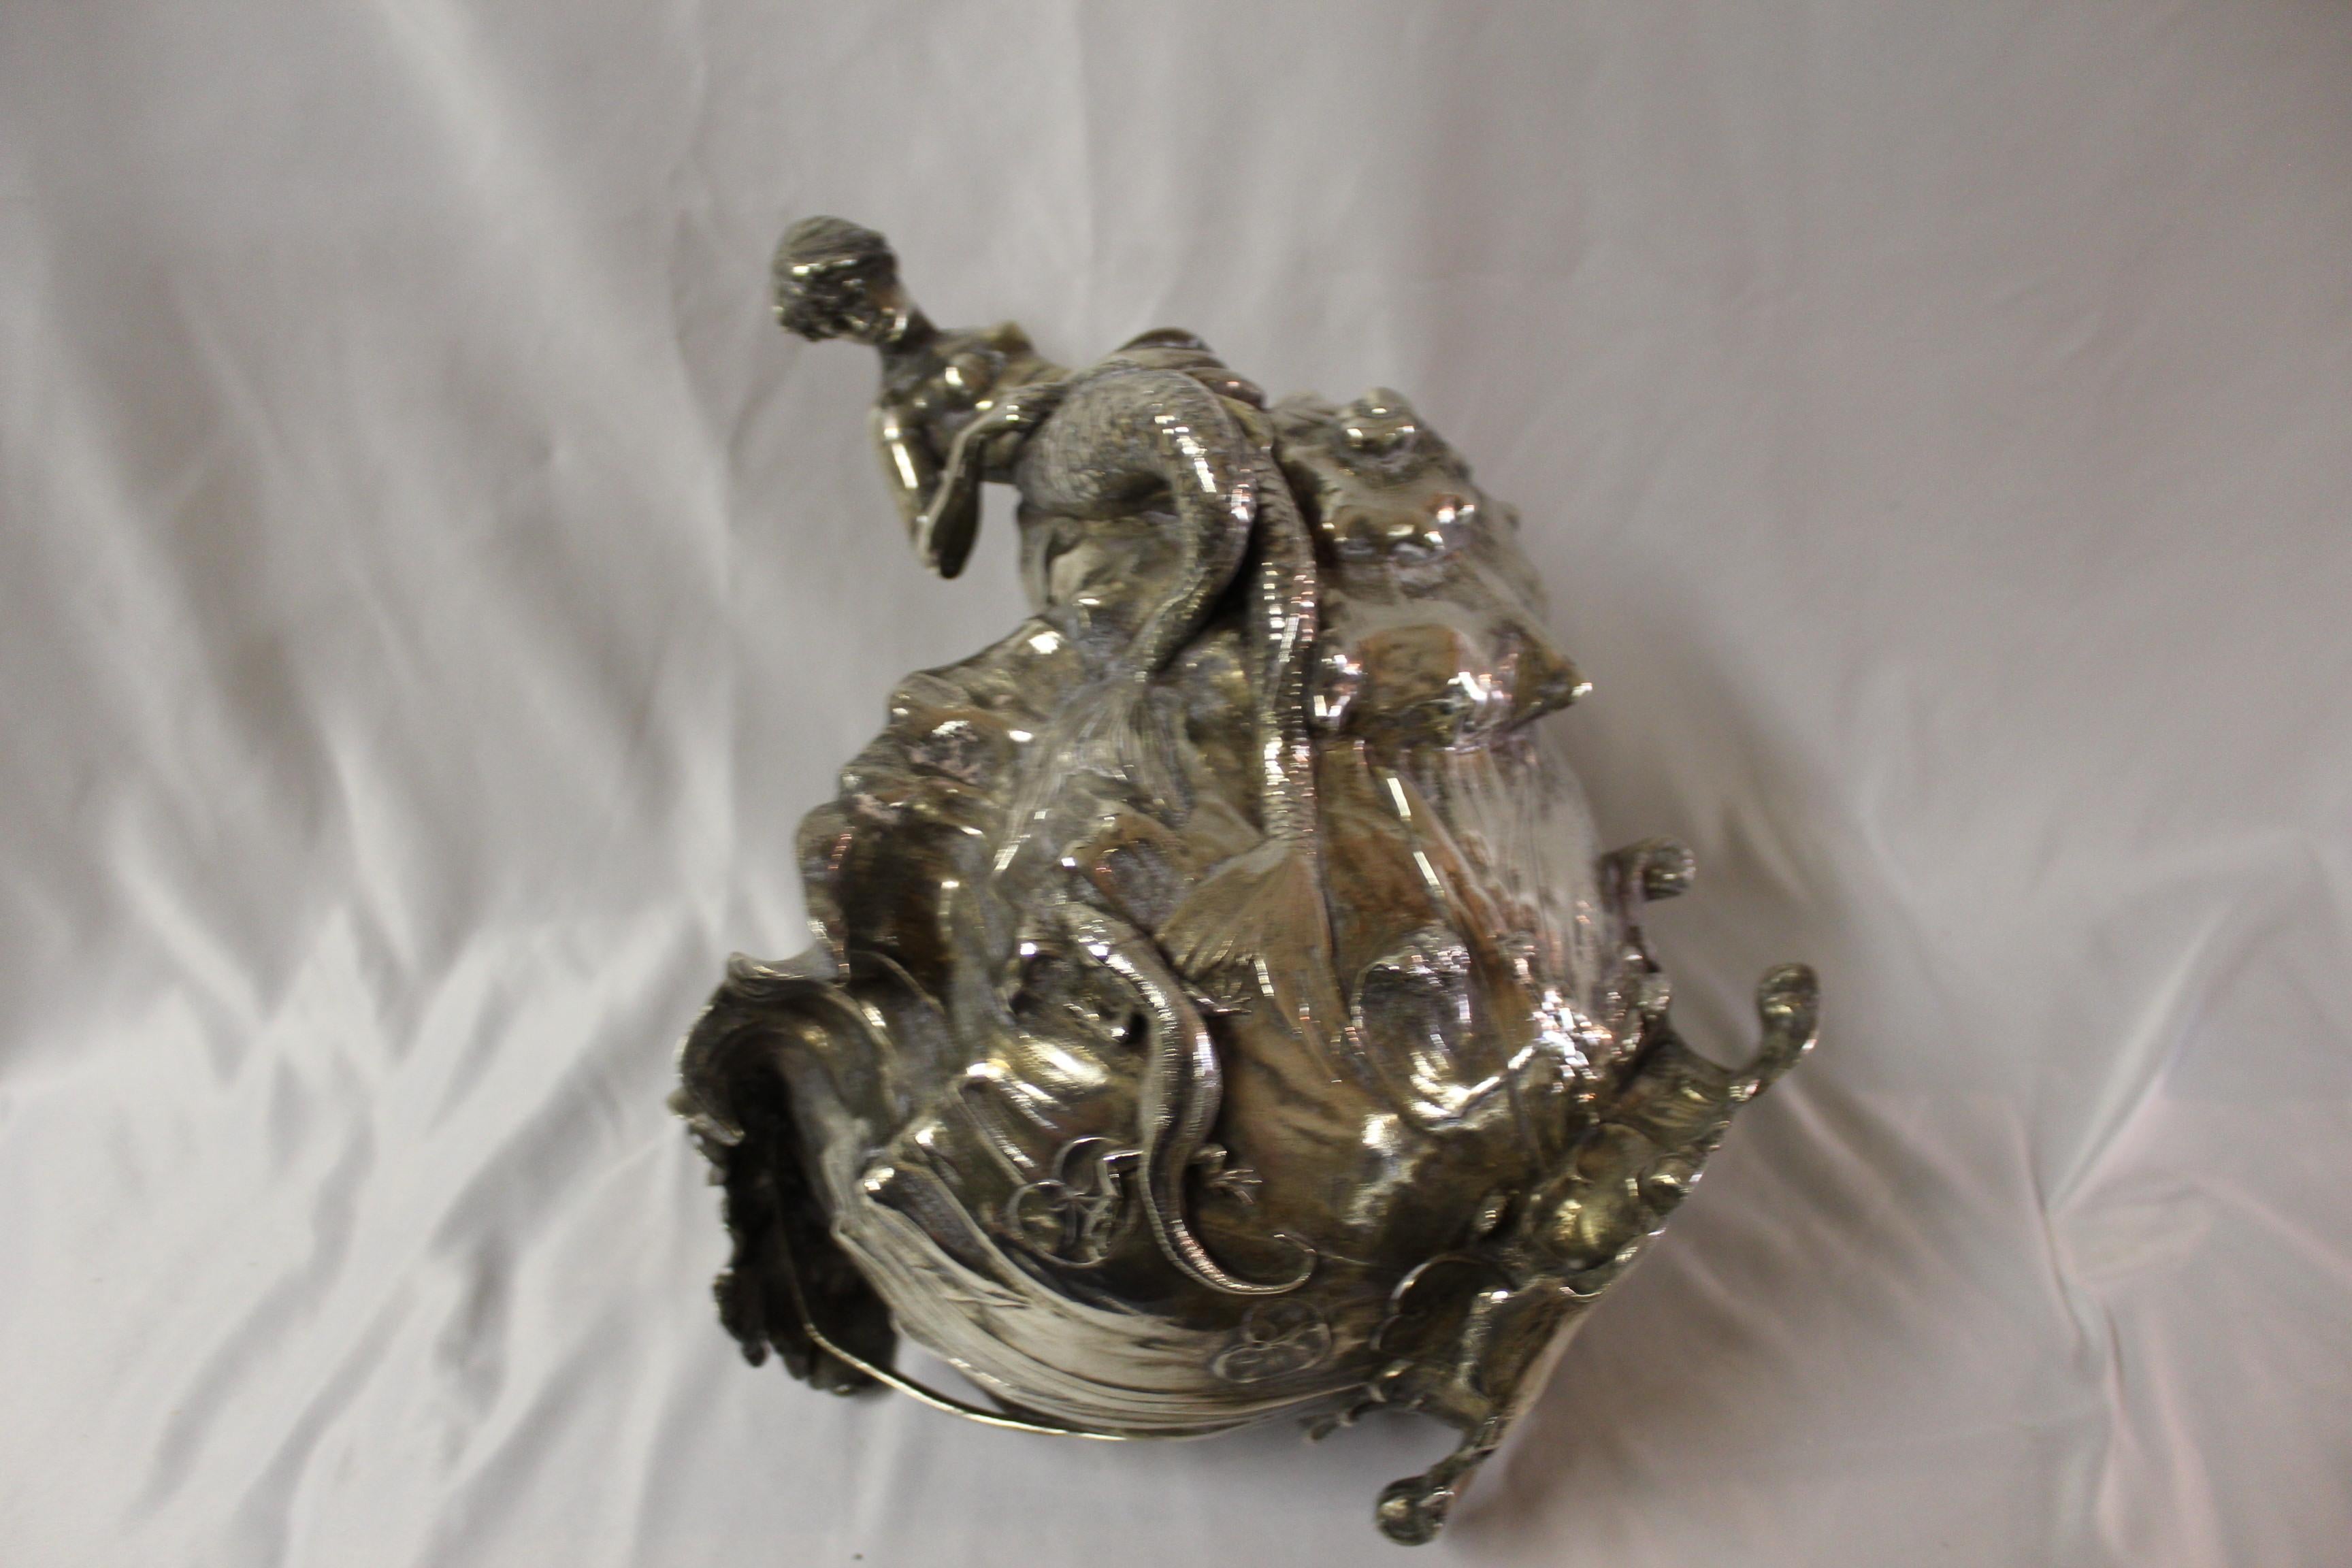 German Art Nouveau Vase (Antique )Silver Plate Mermaid, Signed and Dated 1897 For Sale